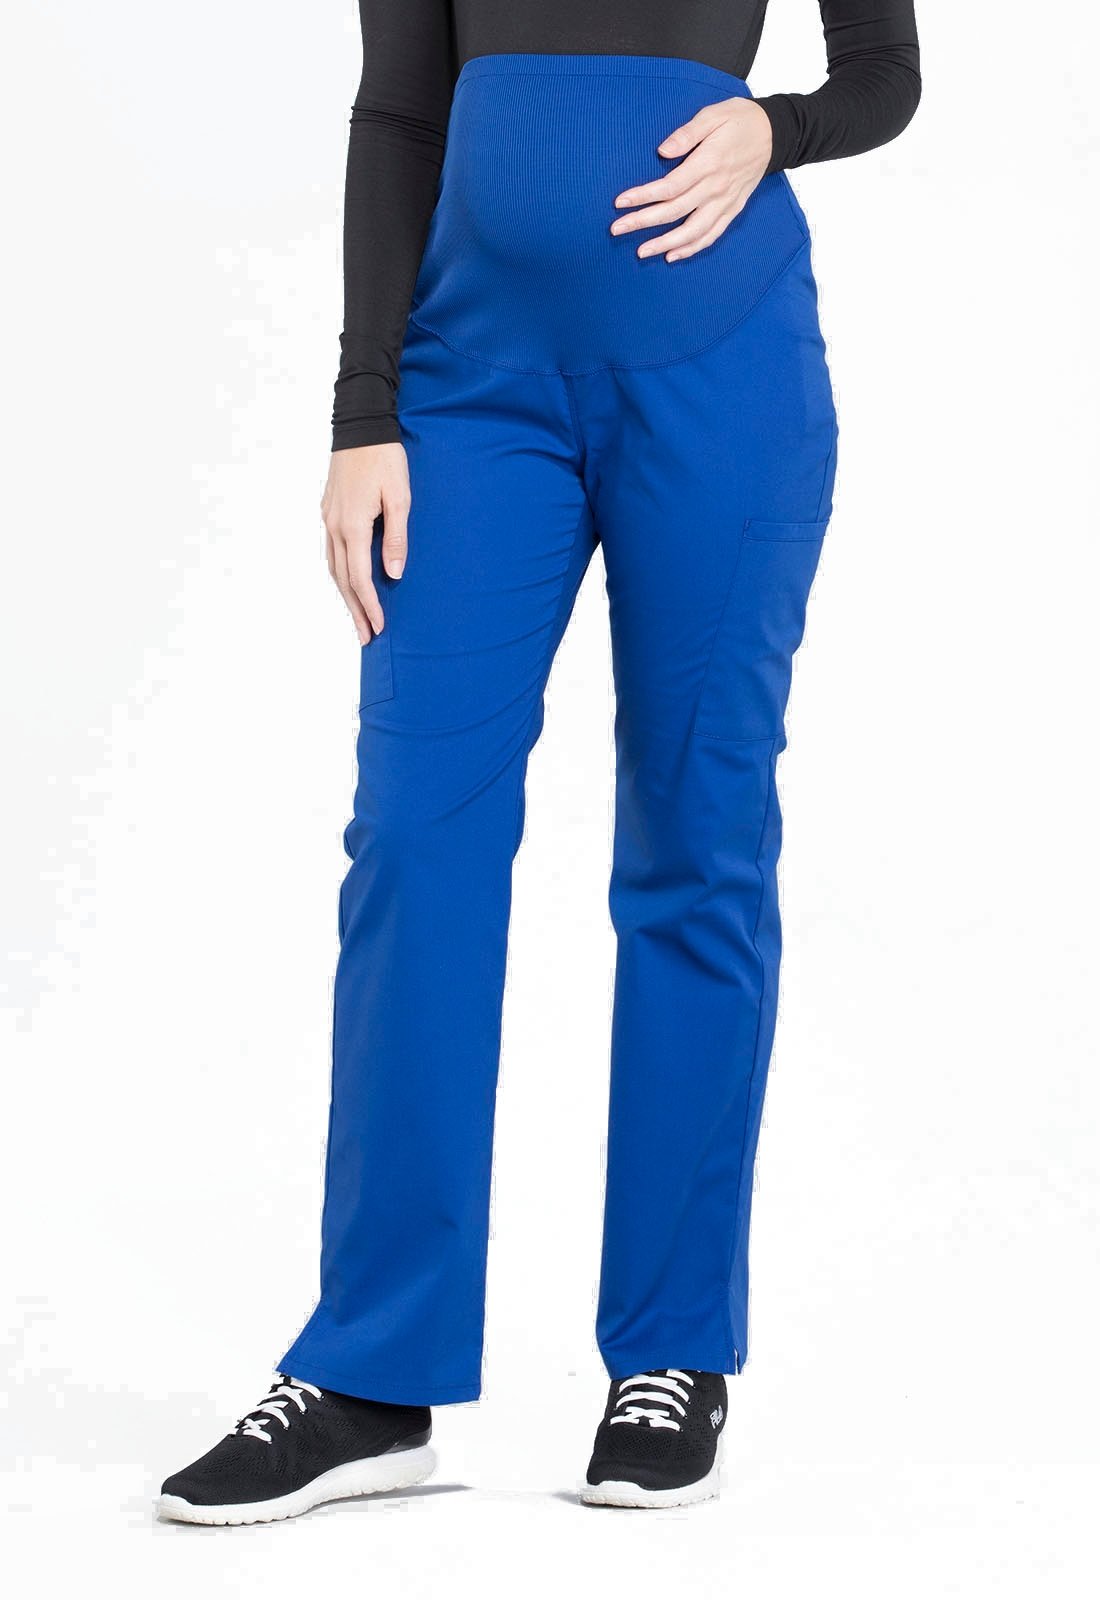 Med Couture Plus One Maternity Cargo Scrub Pant